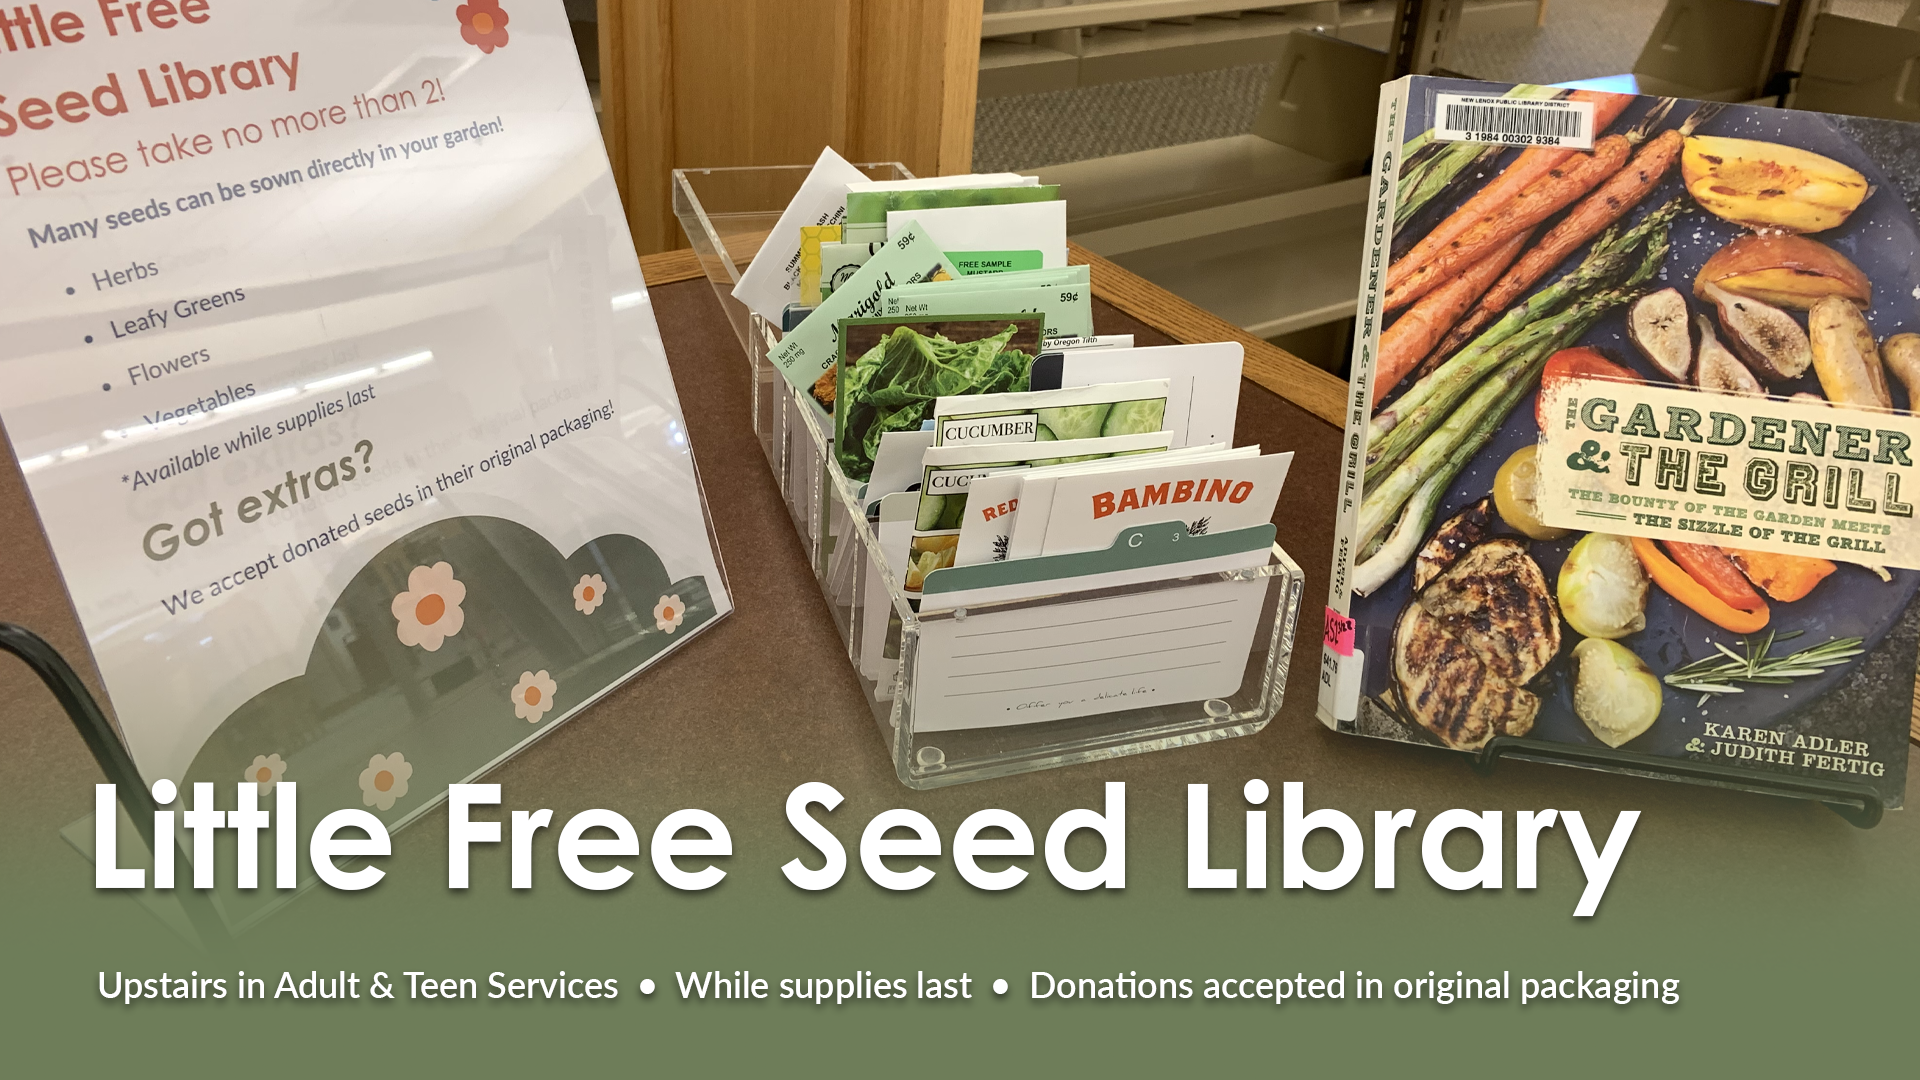 Little Free Seed Library upstairs in Adult and Teen Services